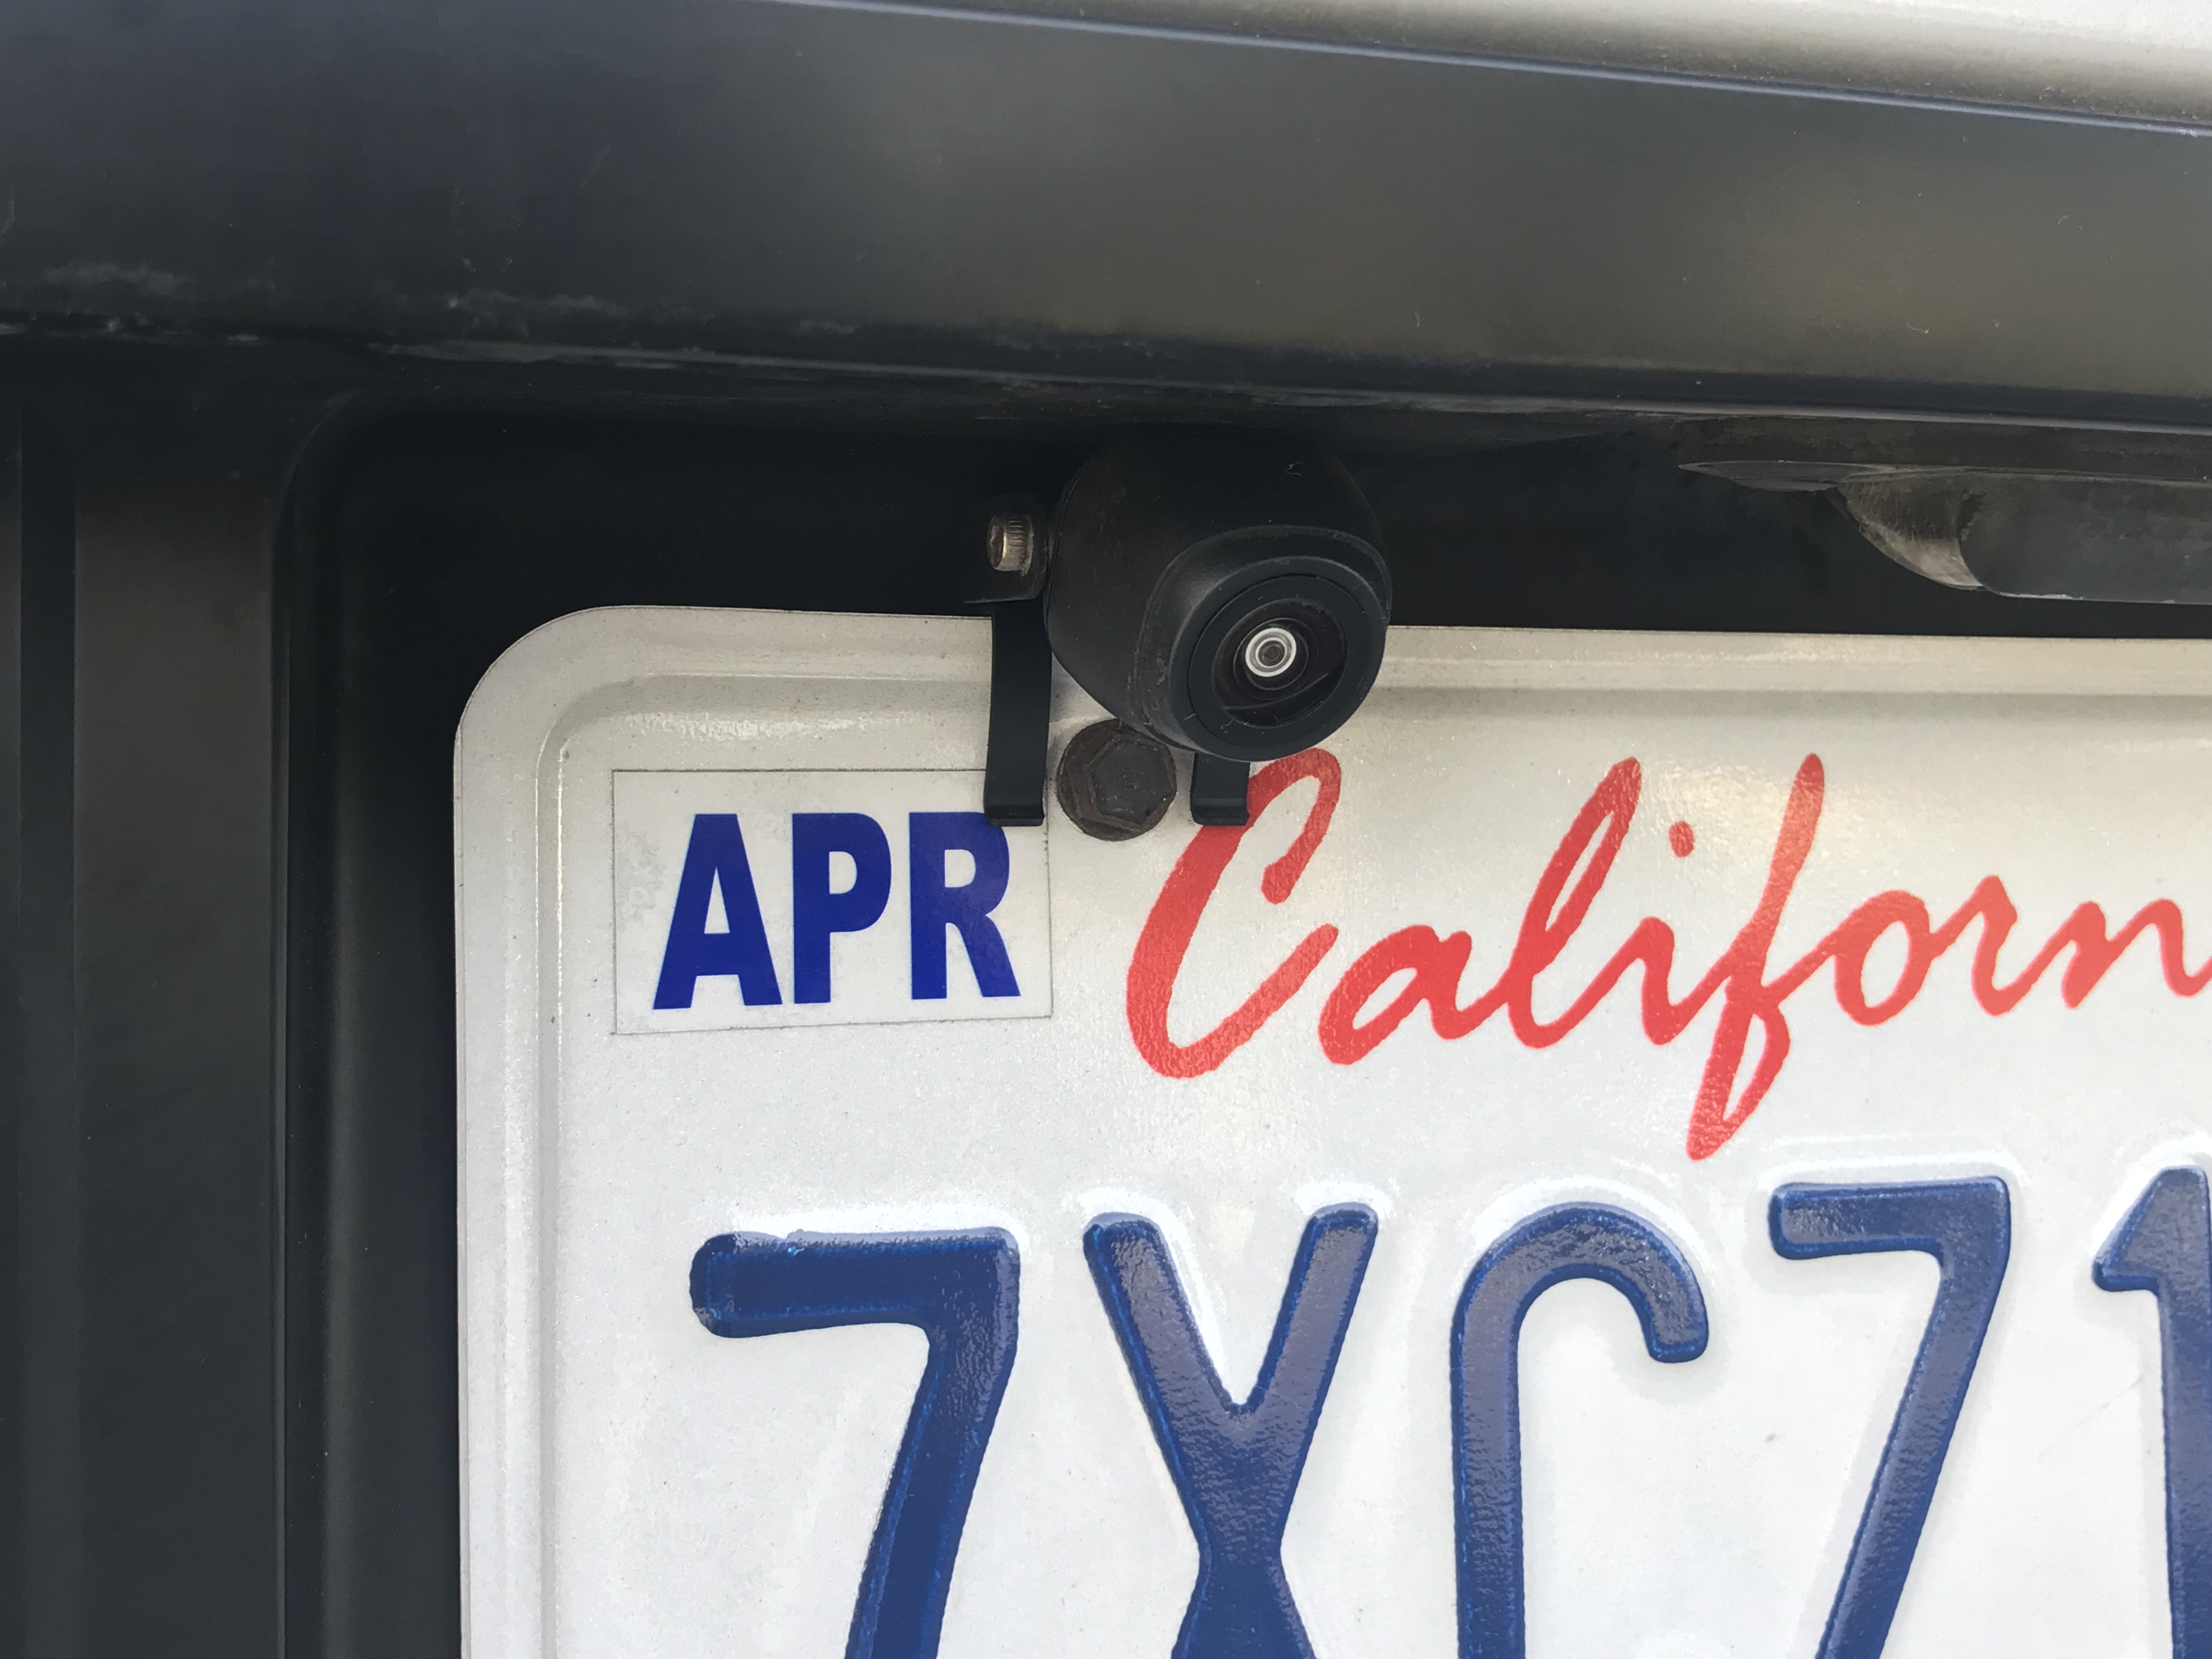 Rear wireless cam bolts to license plate.